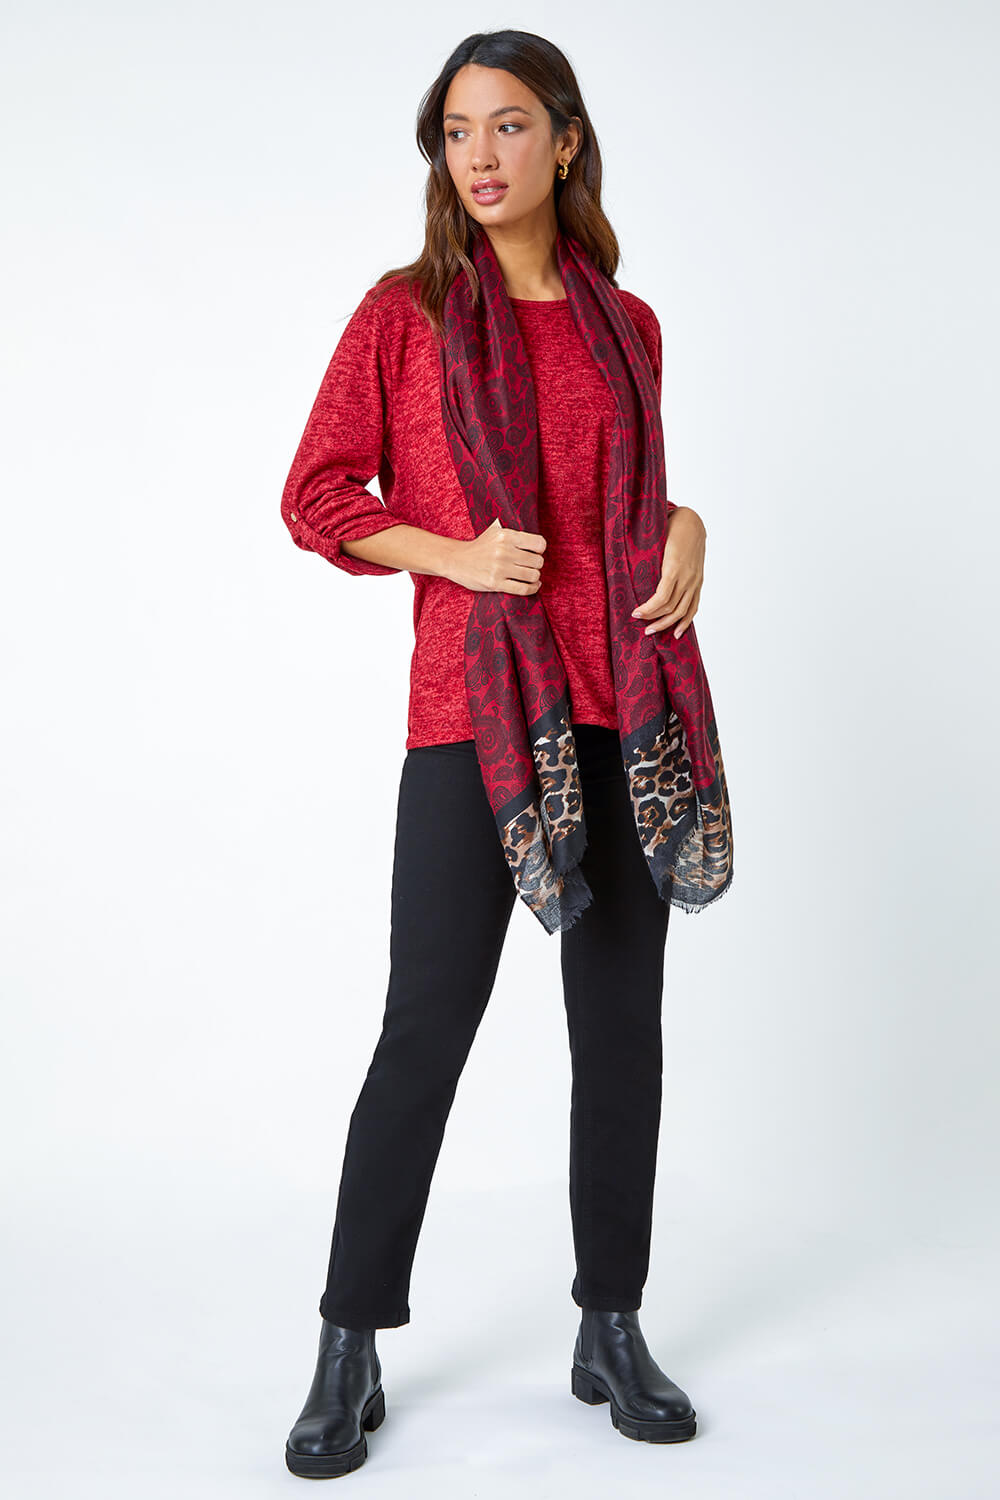 Red Stretch Top with Animal Print Scarf | Roman UK